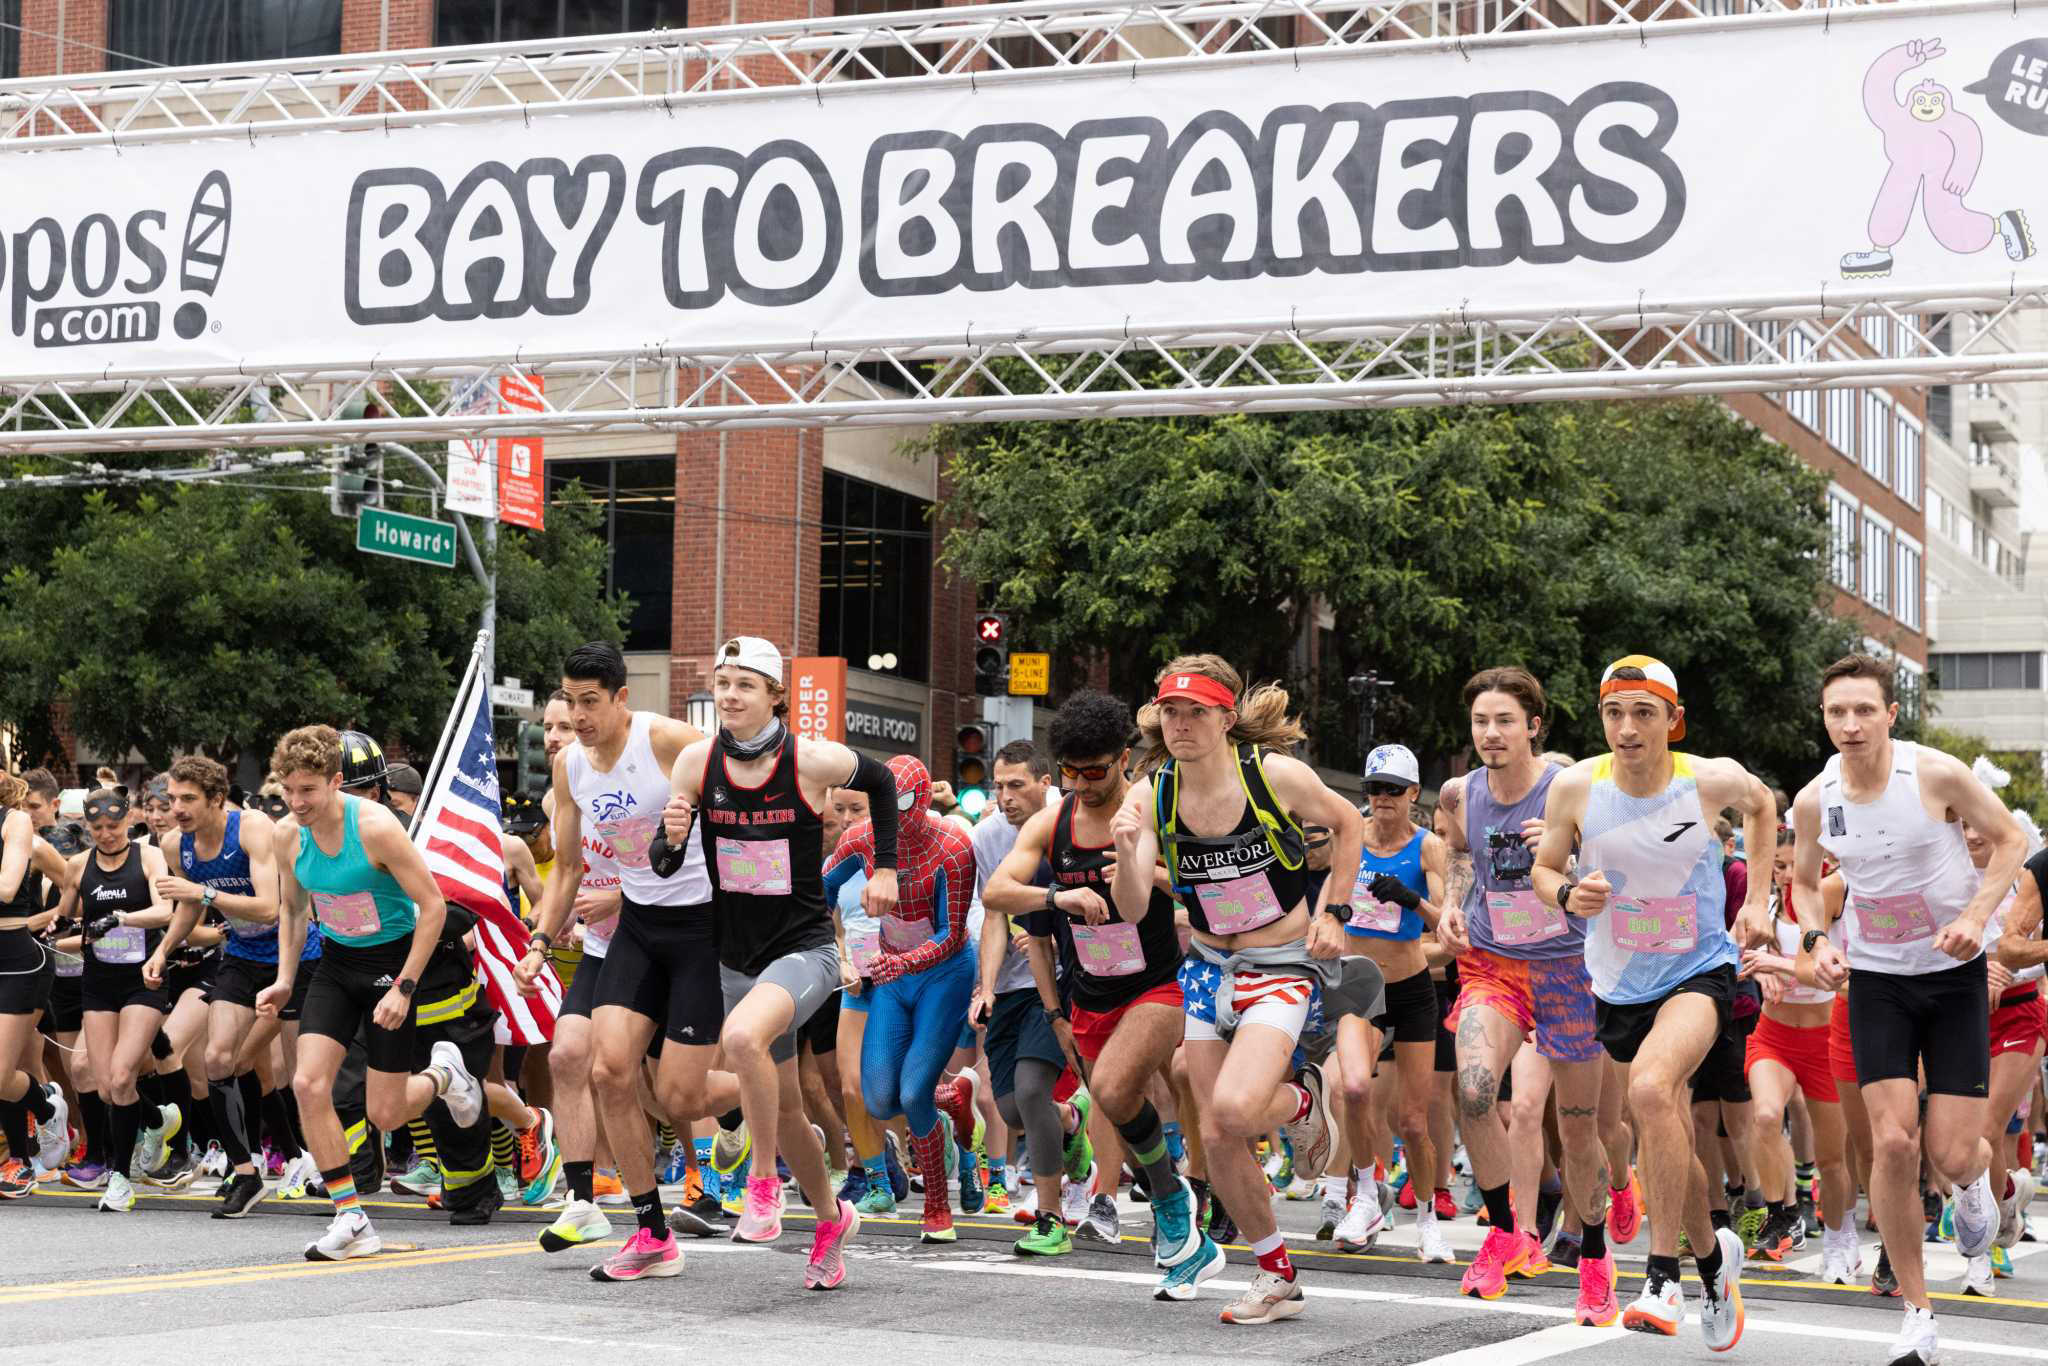 Bay to Breakers off and running in S.F. Here’s a look at the racers